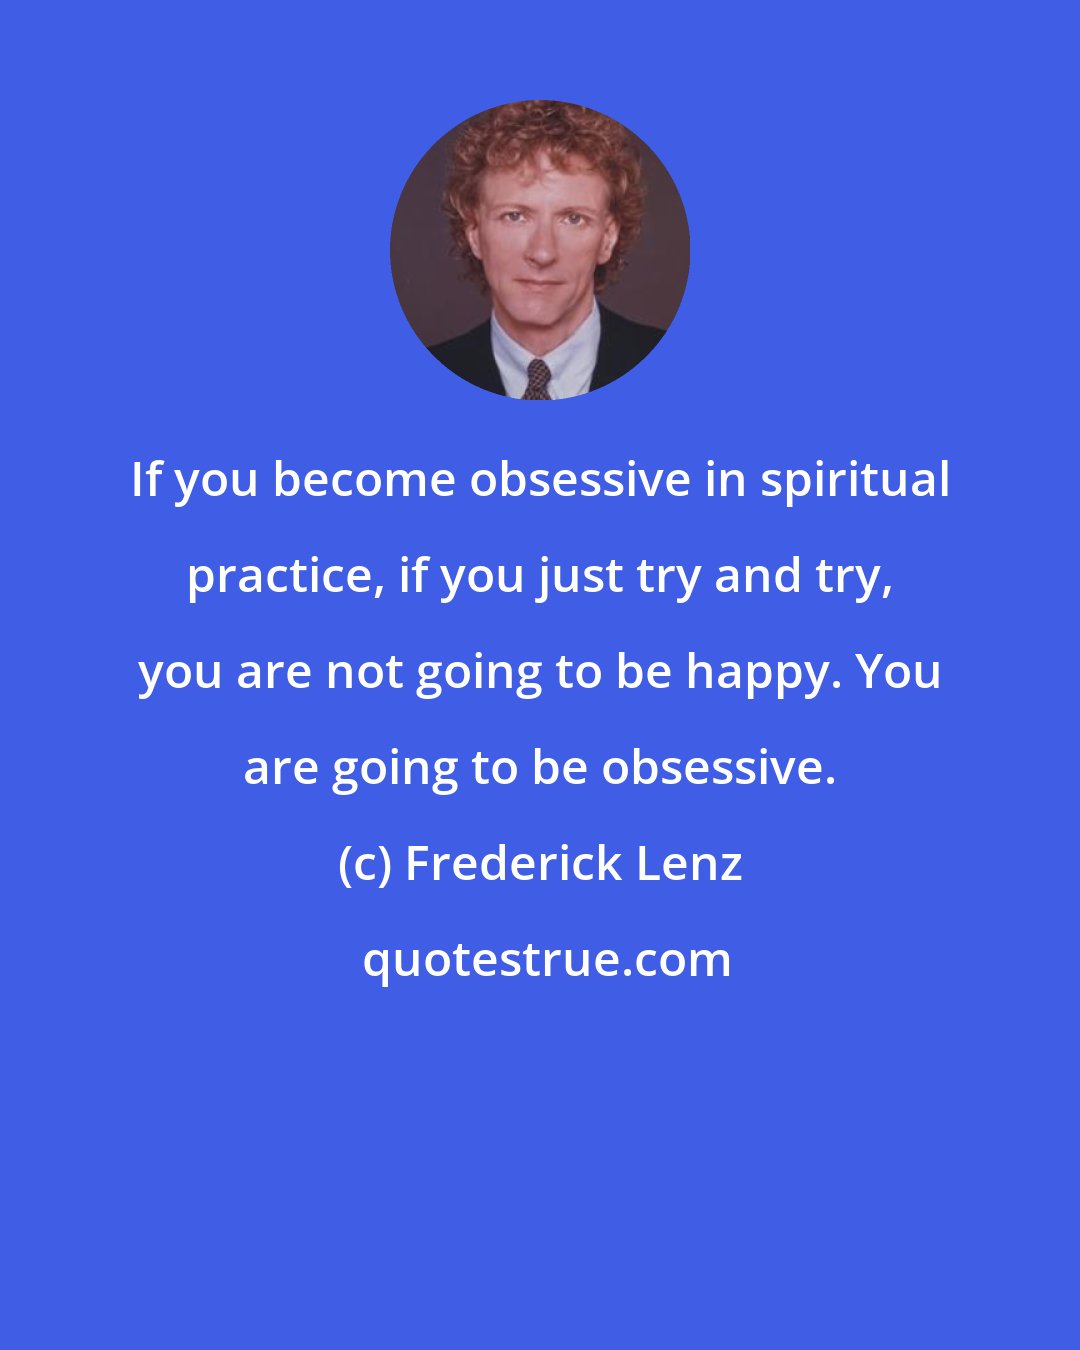 Frederick Lenz: If you become obsessive in spiritual practice, if you just try and try, you are not going to be happy. You are going to be obsessive.